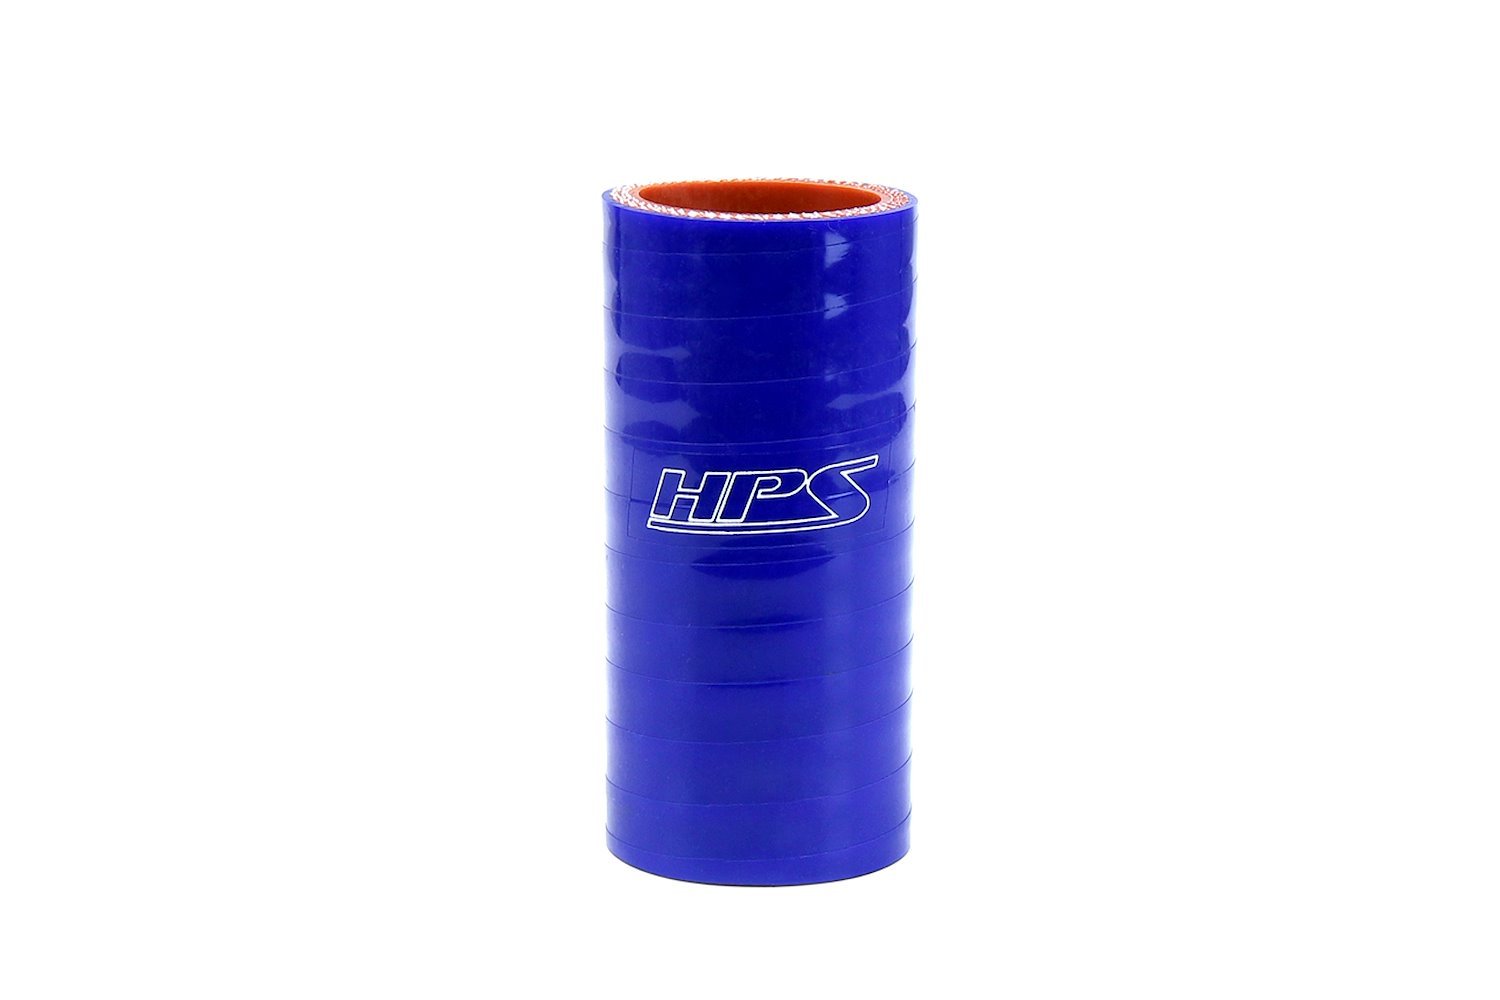 HTSC-187-BLUE Silicone Coupler Hose, High-Temp 4-Ply Reinforced, 1-7/8 in. ID, 3 in. Long, Blue